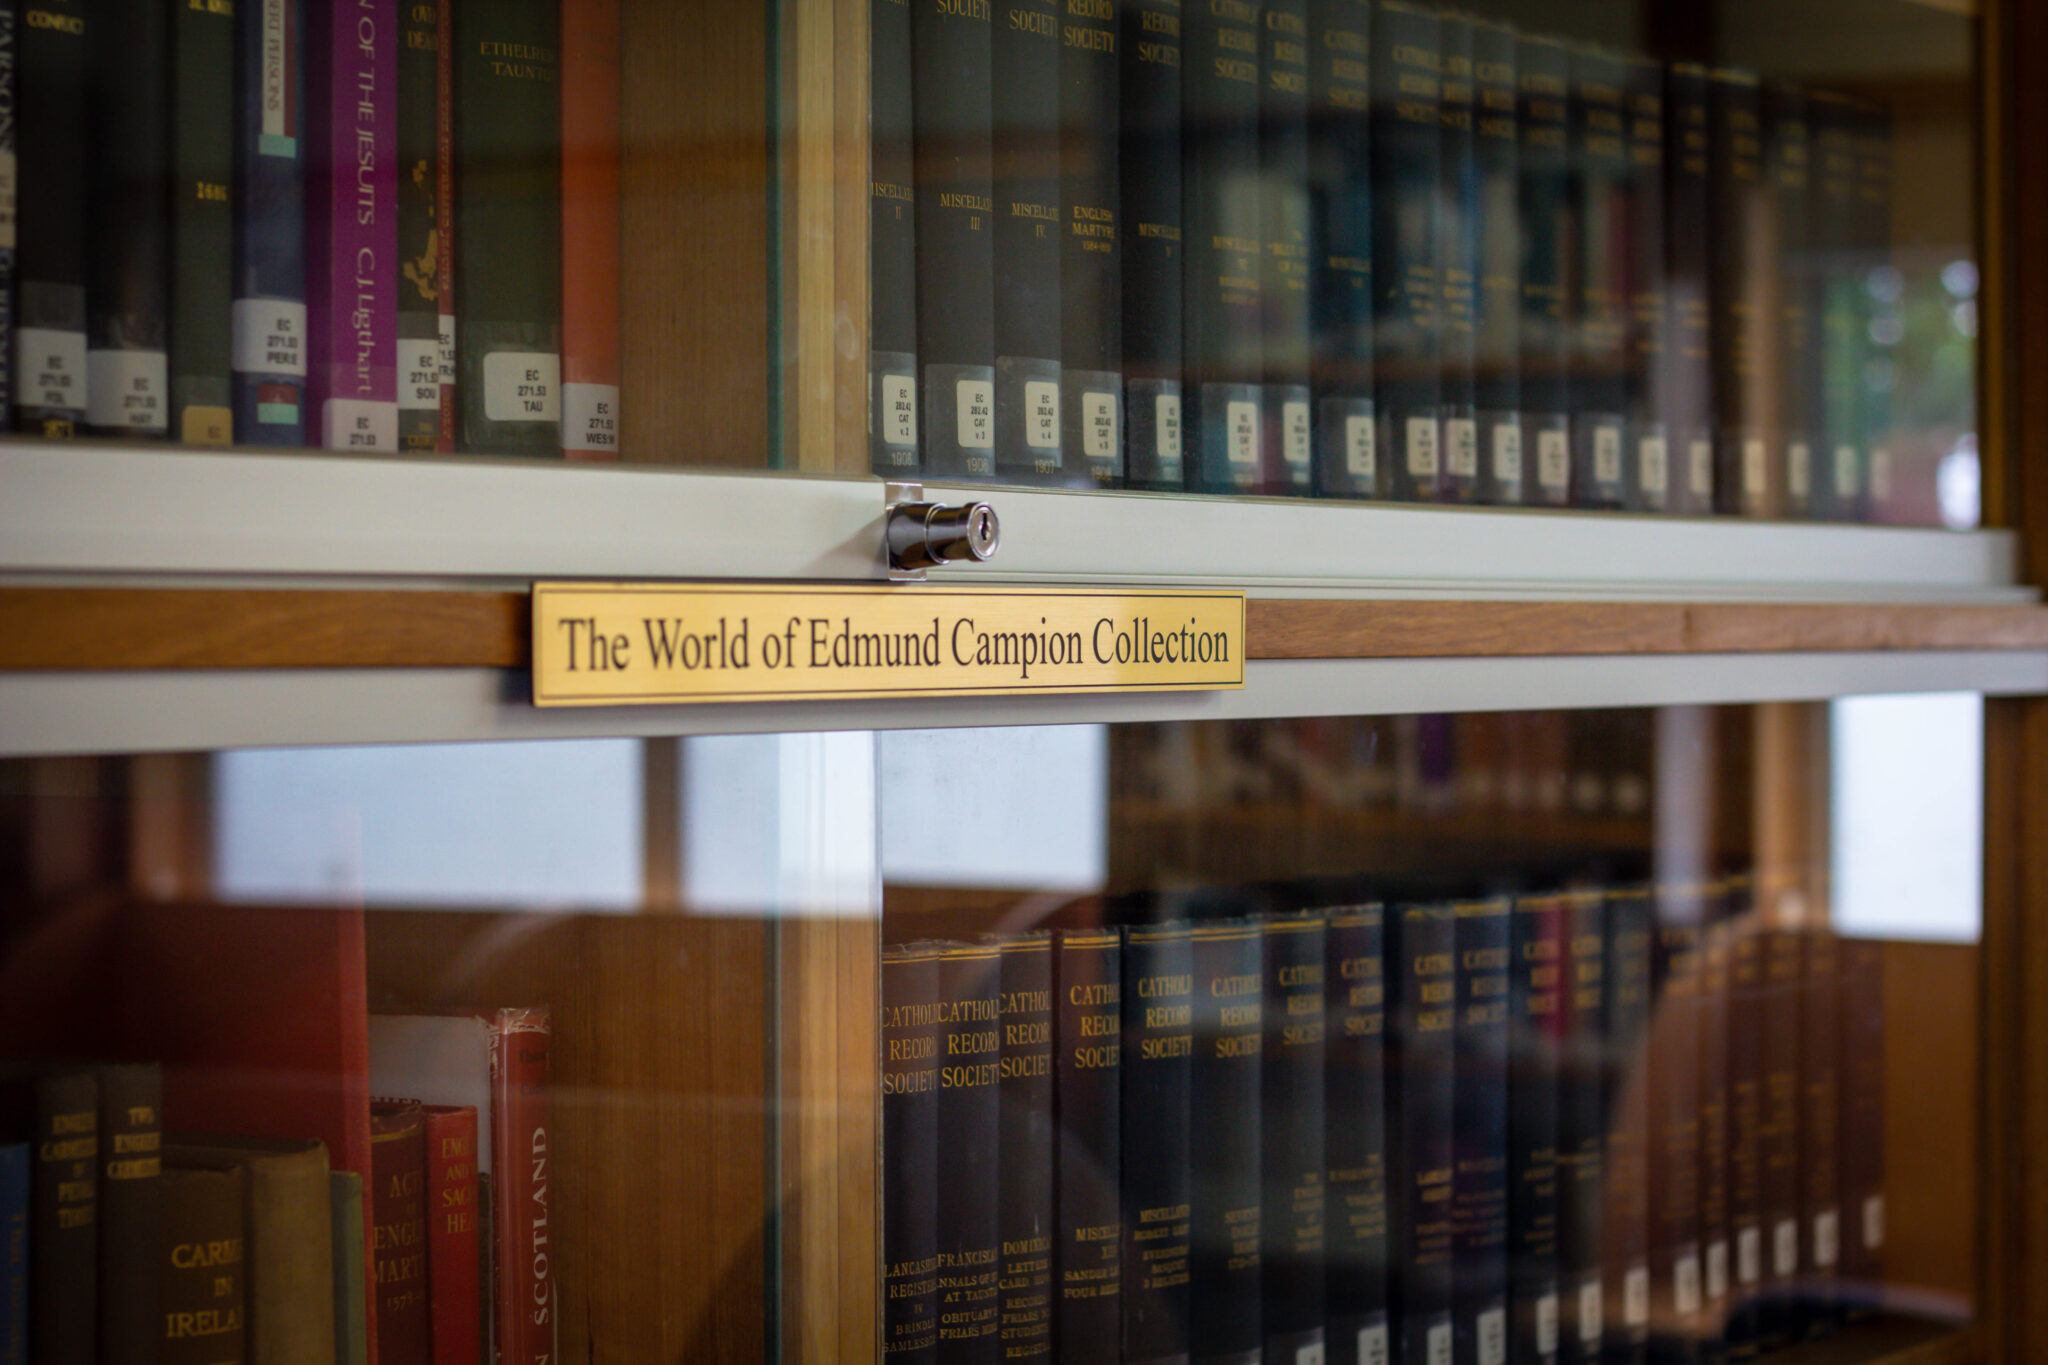 Library in Focus | The World of Edmund Campion